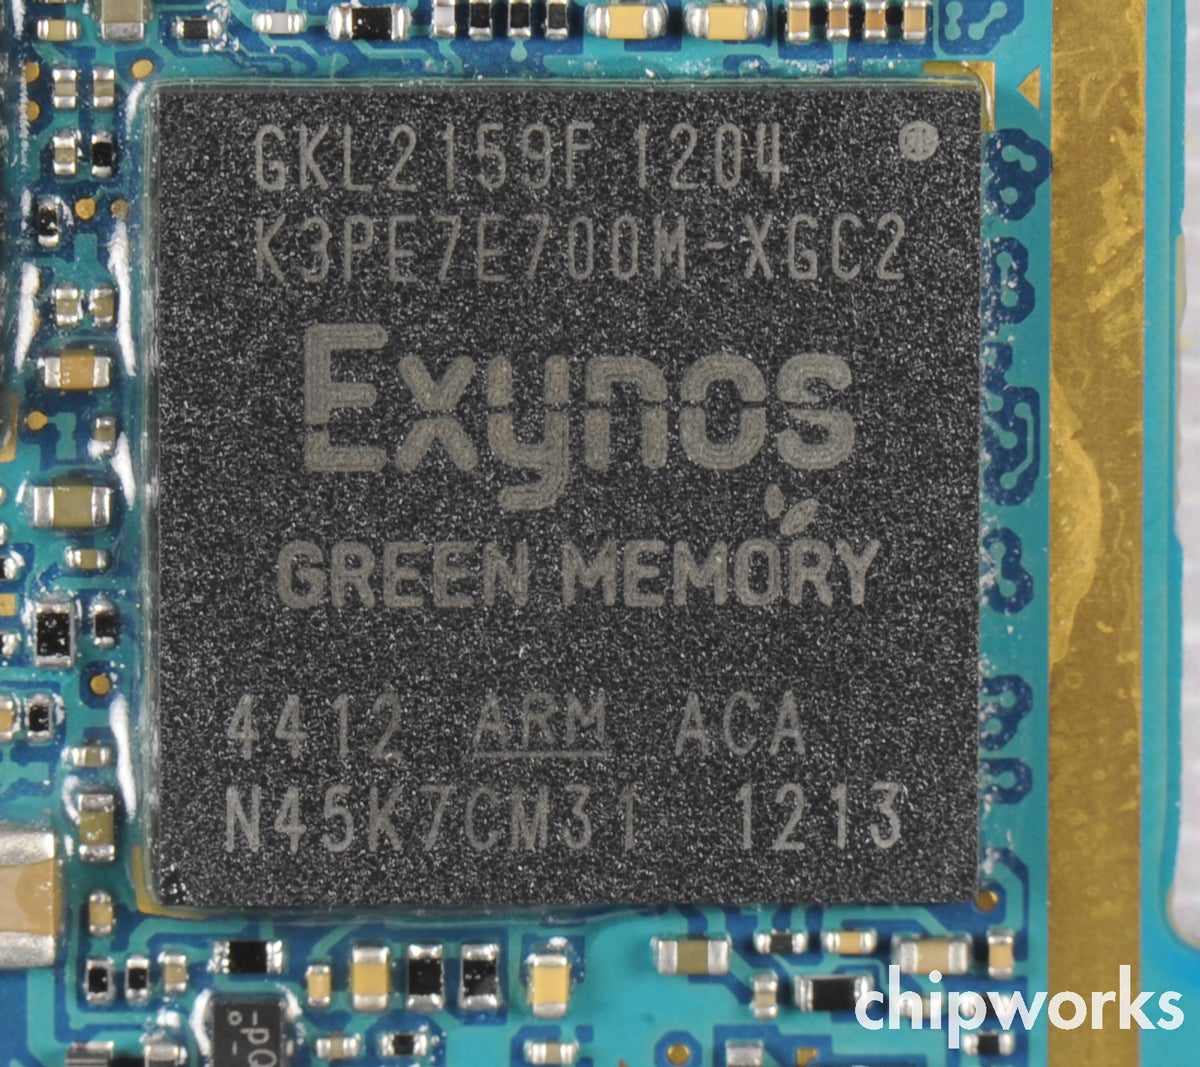 Inside the GT-i9300, the quad-core 1.4 GHz Samsung Exynos 4412 - Samsung Galaxy S III torn down, has same camera sensor as Apple iPhone 4S